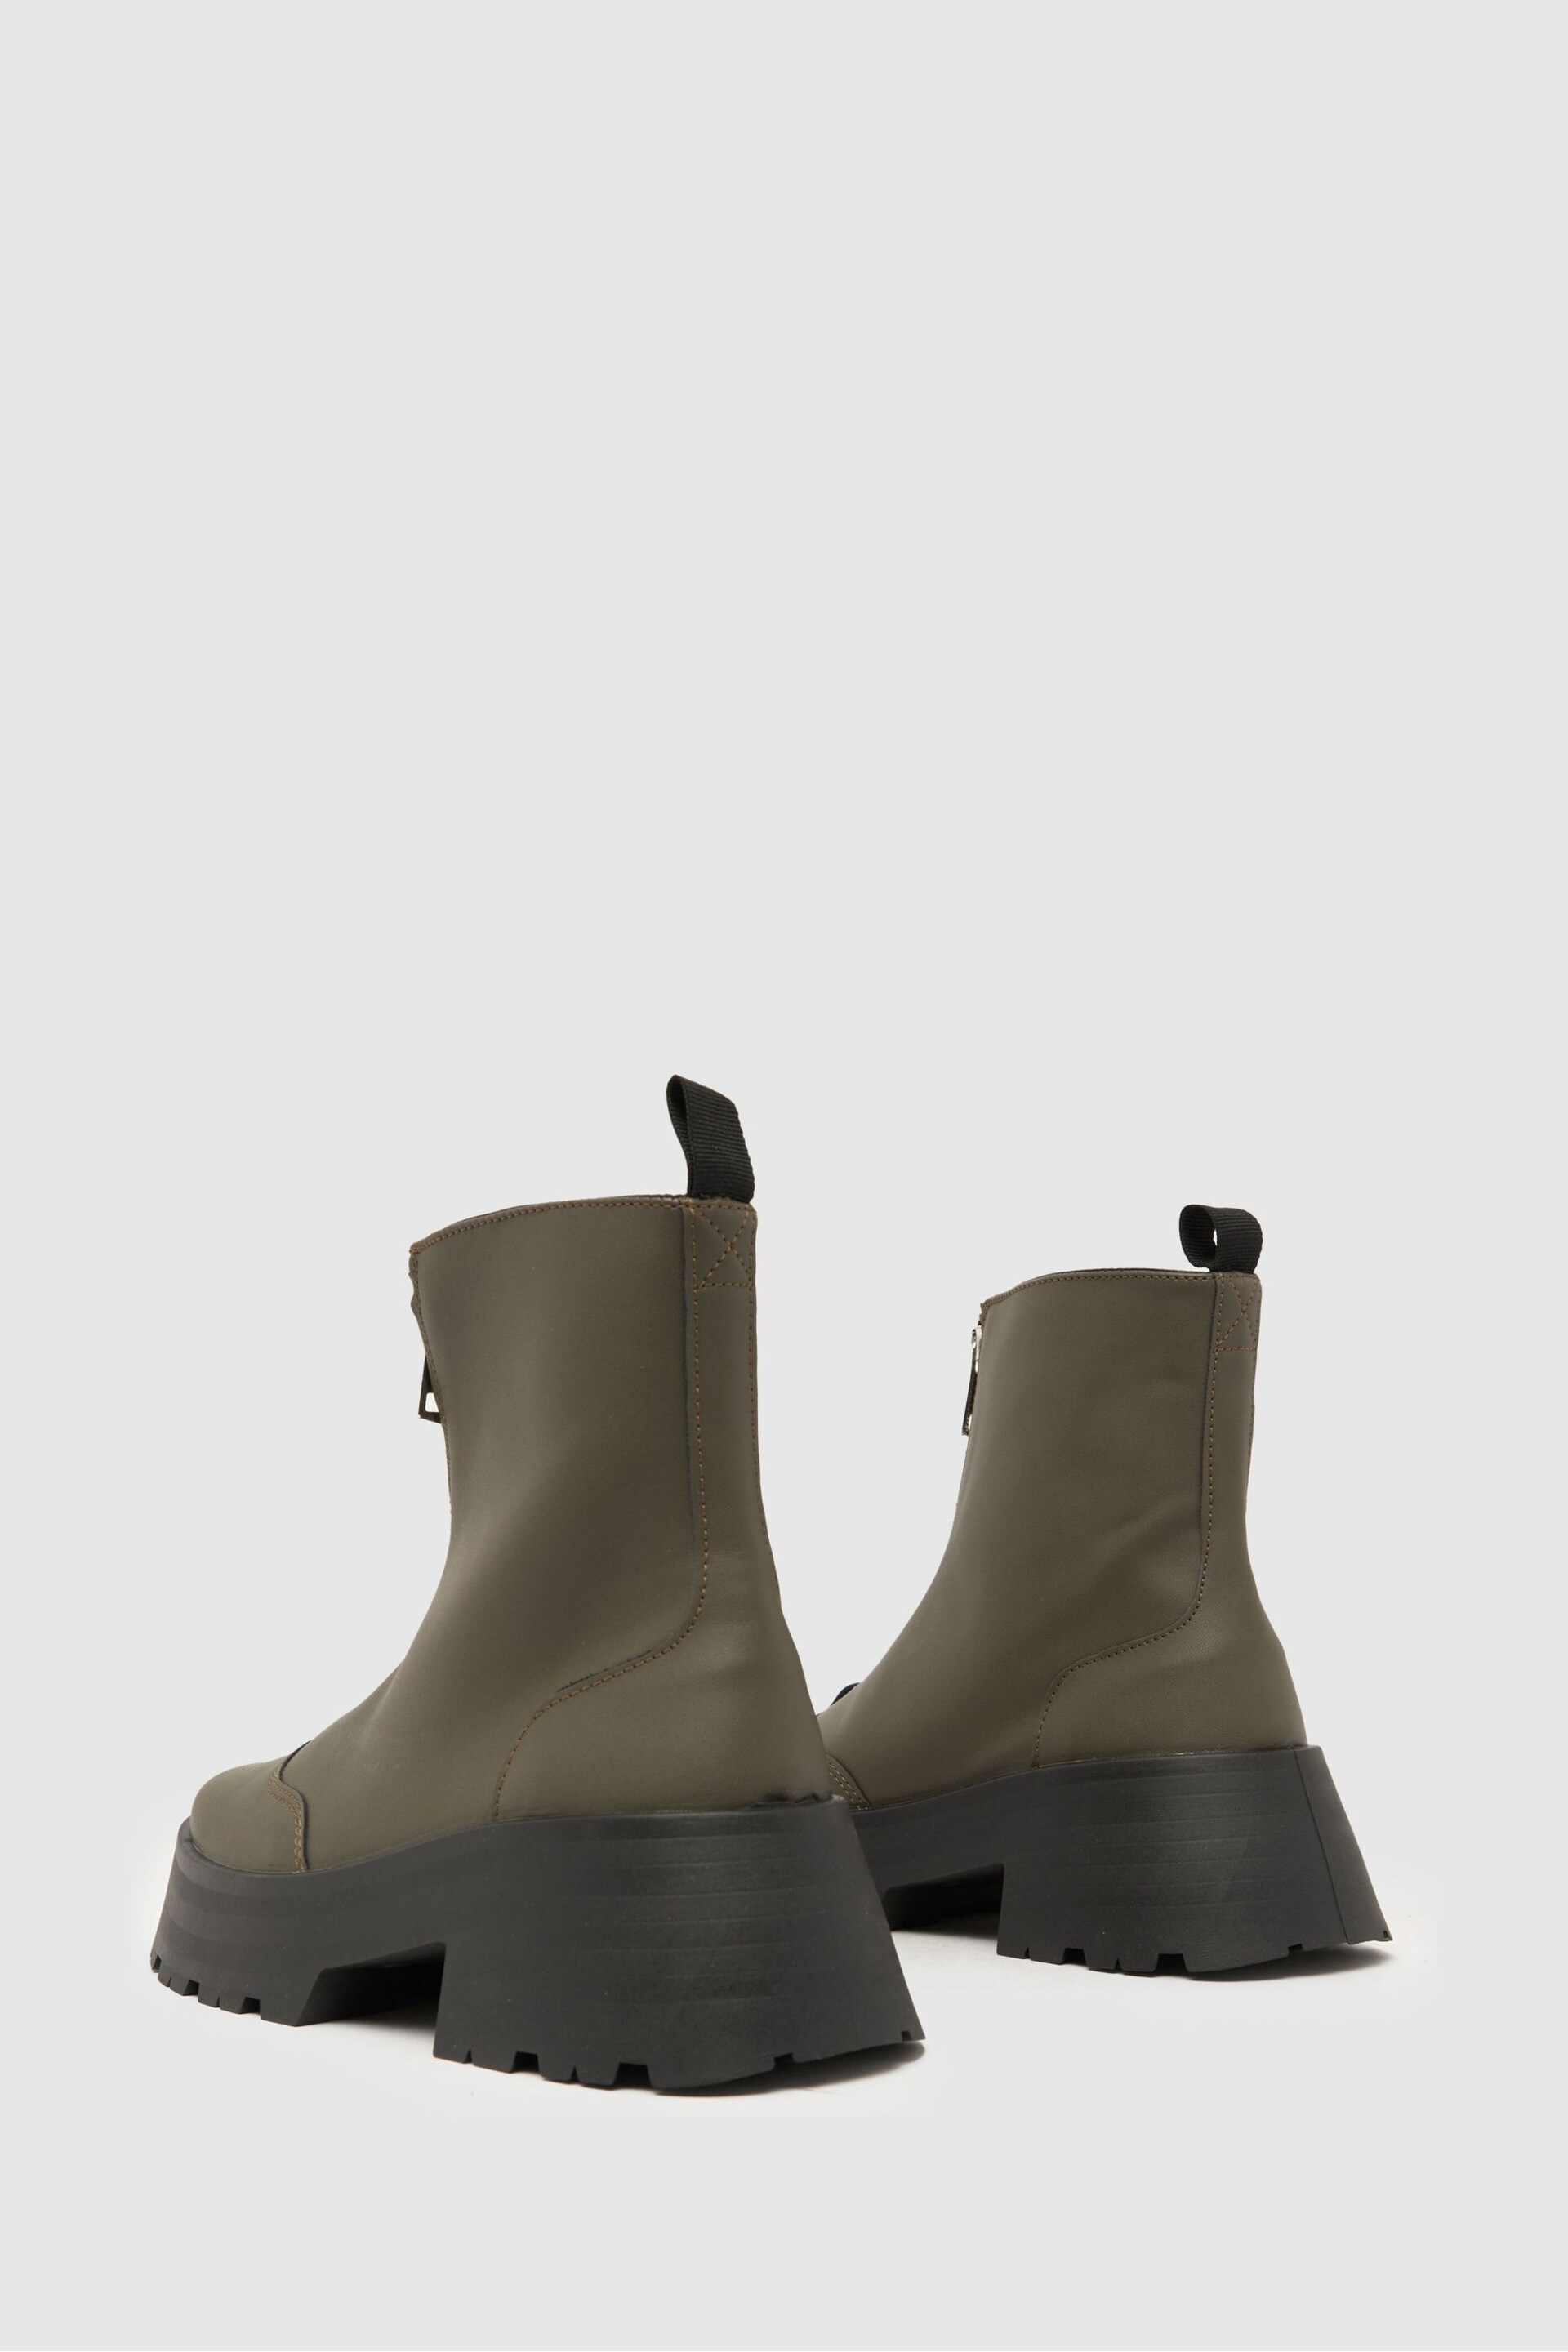 Schuh Arnold Chunky Zip Front Boots - Image 4 of 4